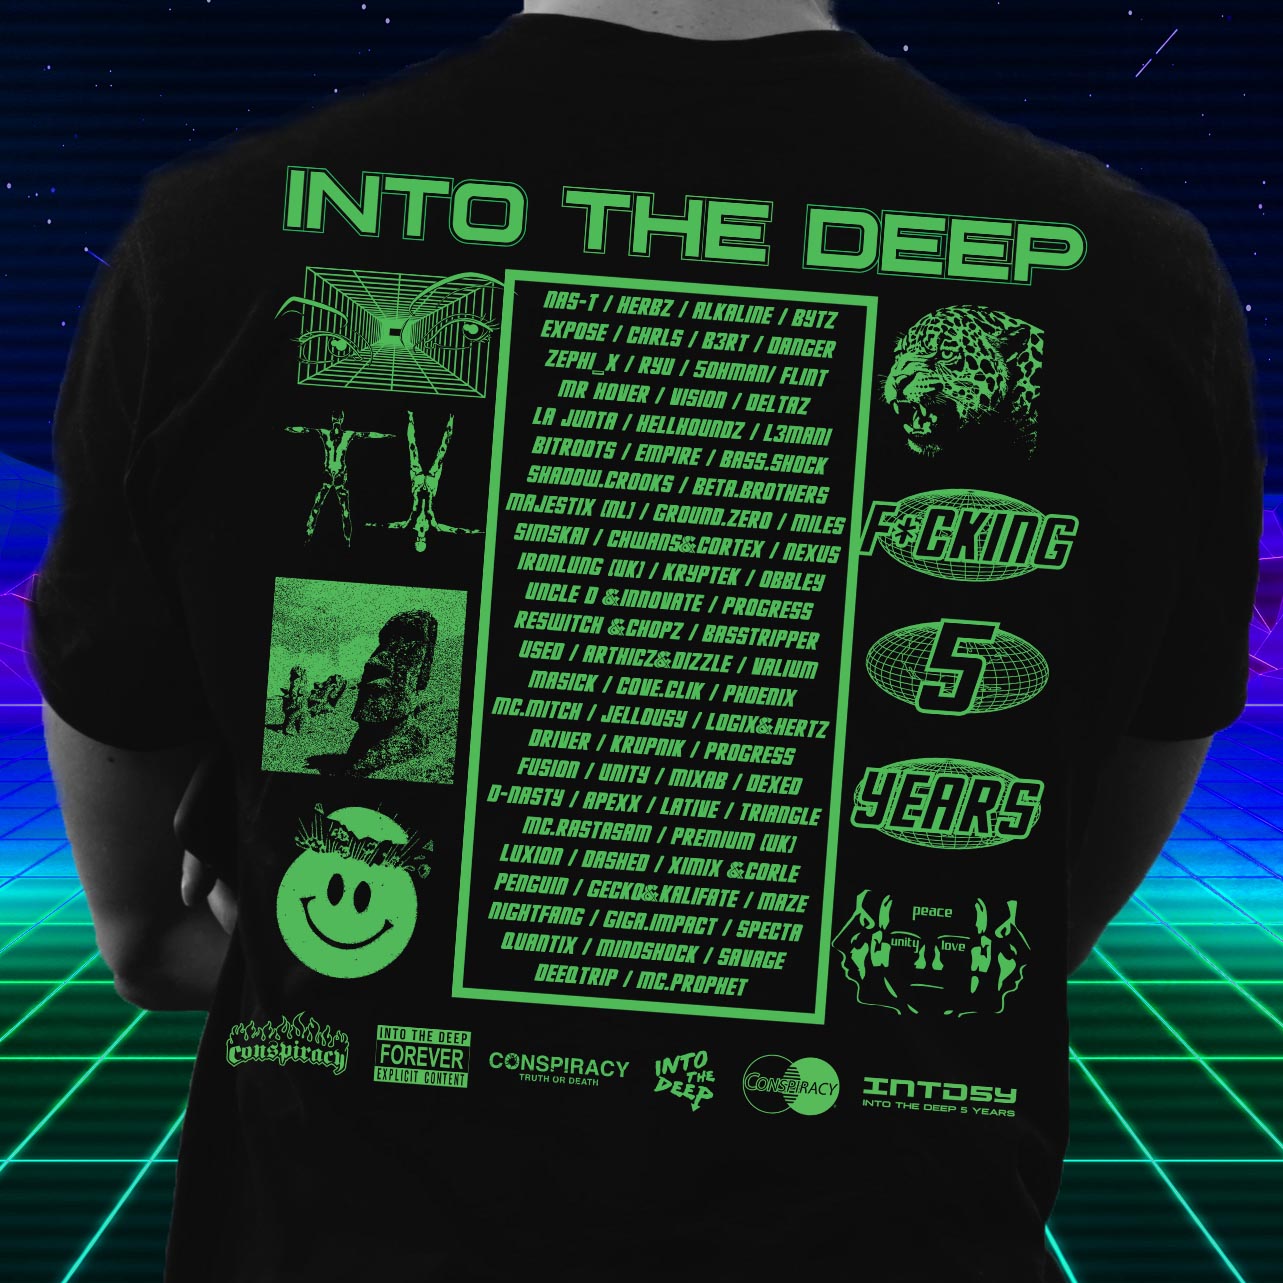 Into The Deep 5 years anniversary - Conspiracy 1988